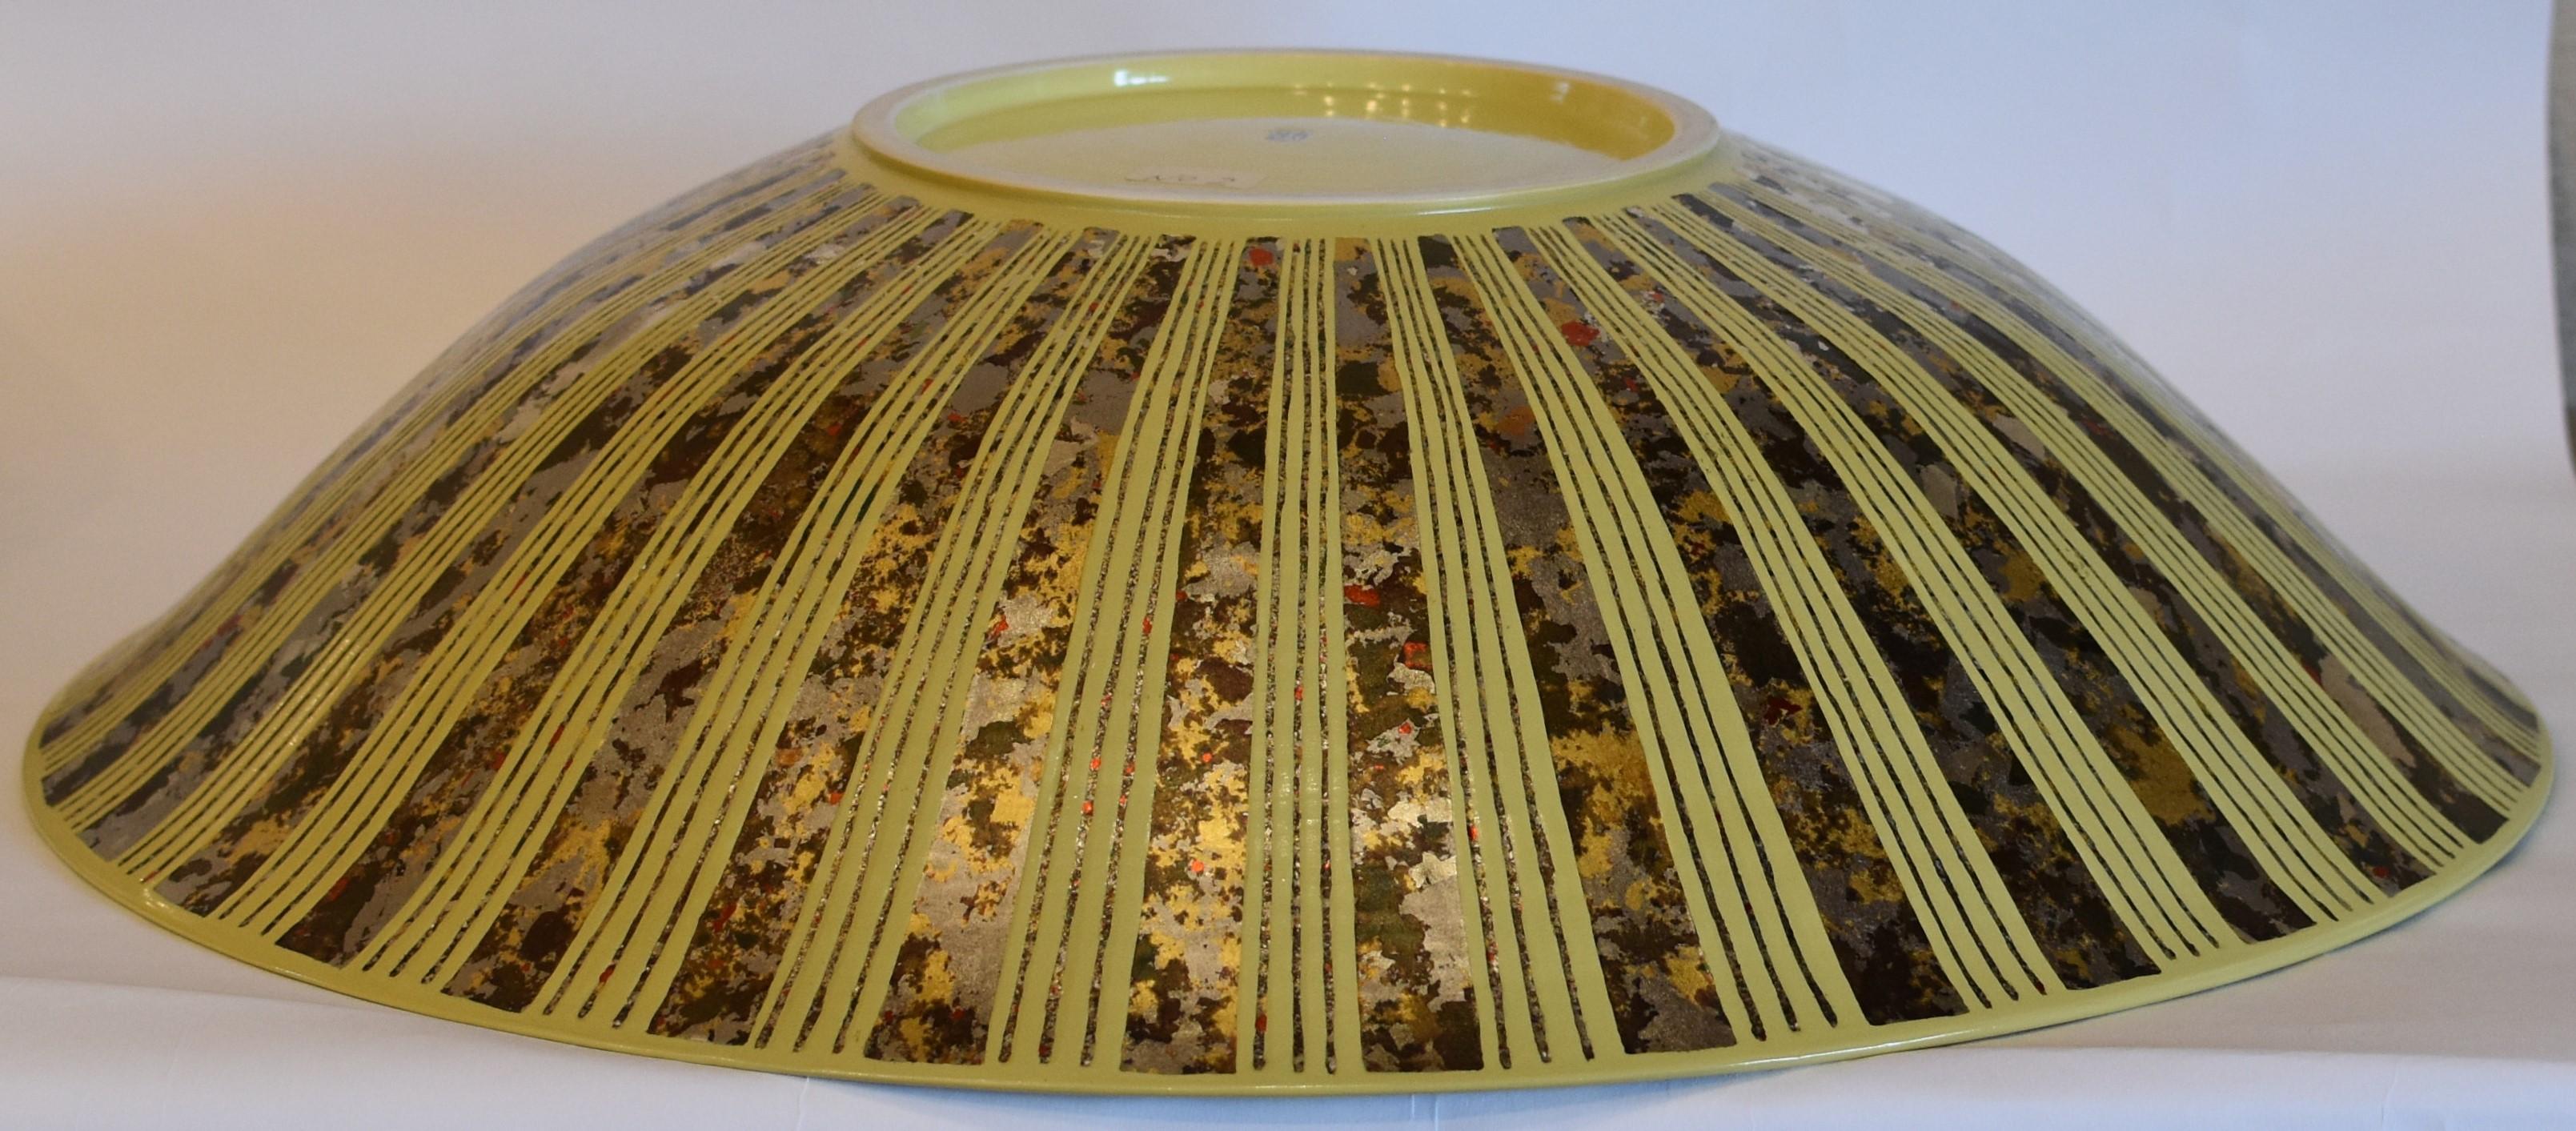 Exquisite contemporary large Japanese museum-quality award-winning porcelain deep charger in vivid yellow, adorned with etchings in a complicated pattern features silver foil in platinum, gold and a beautiful combination of multiple colors,